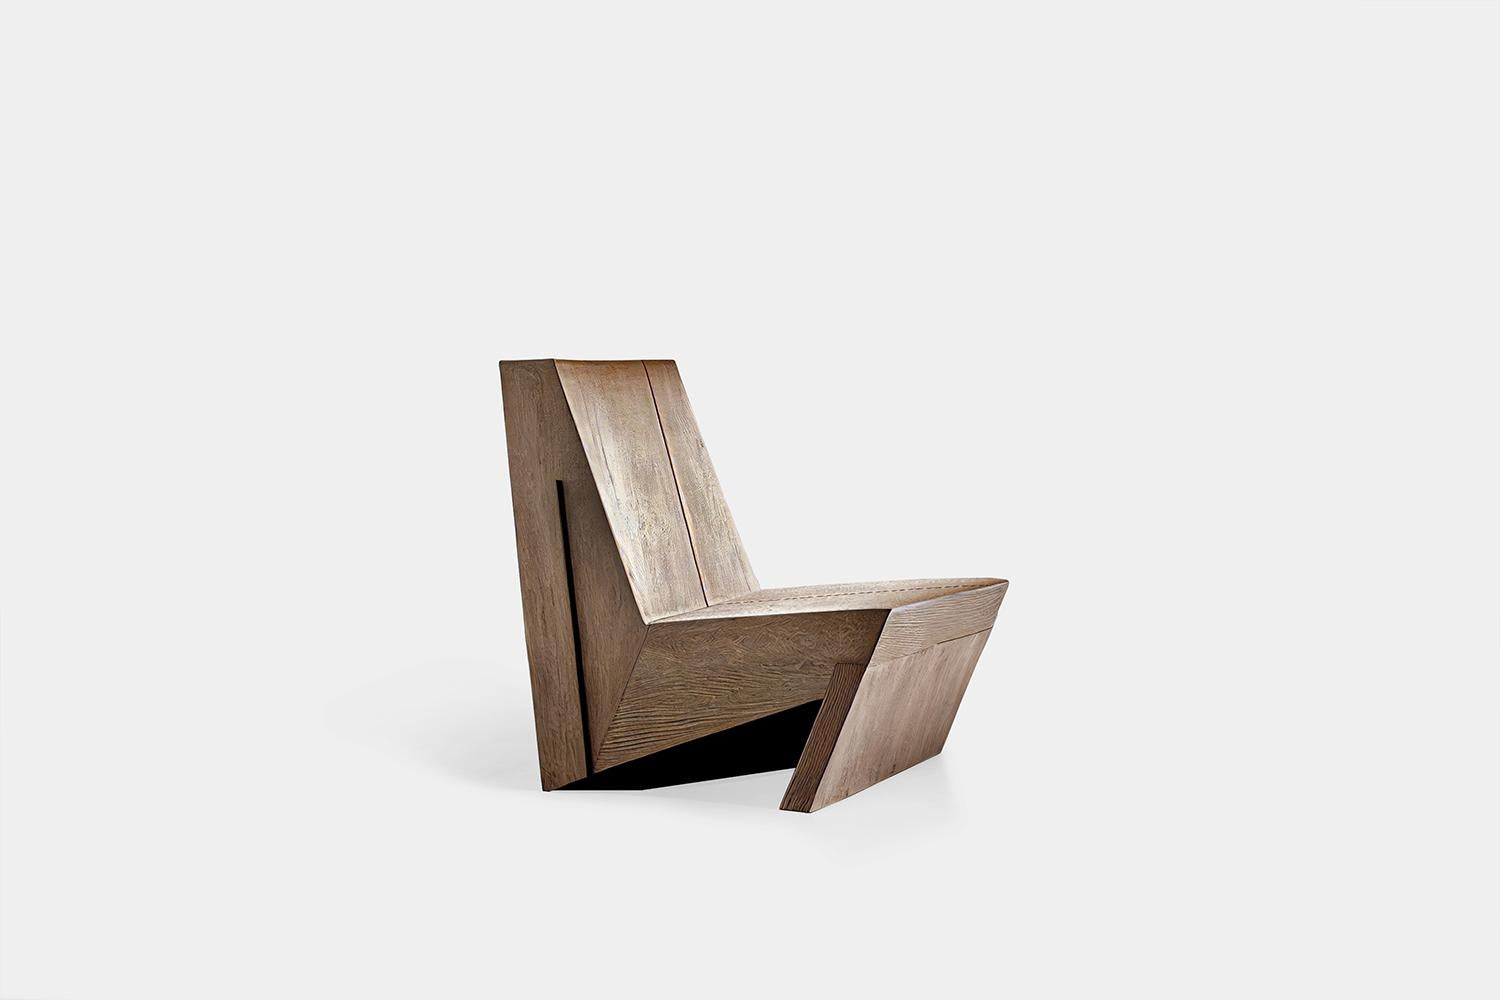 Minimalist Brutalist Lounge Chair, Burn Oak Wood Muted Easy Chair by NONO 

Brutalist chairs boast a strong, yet passive presence with minimalist designs that highlight the rich textures of natural oak wood. The goal was to showcase the beauty and